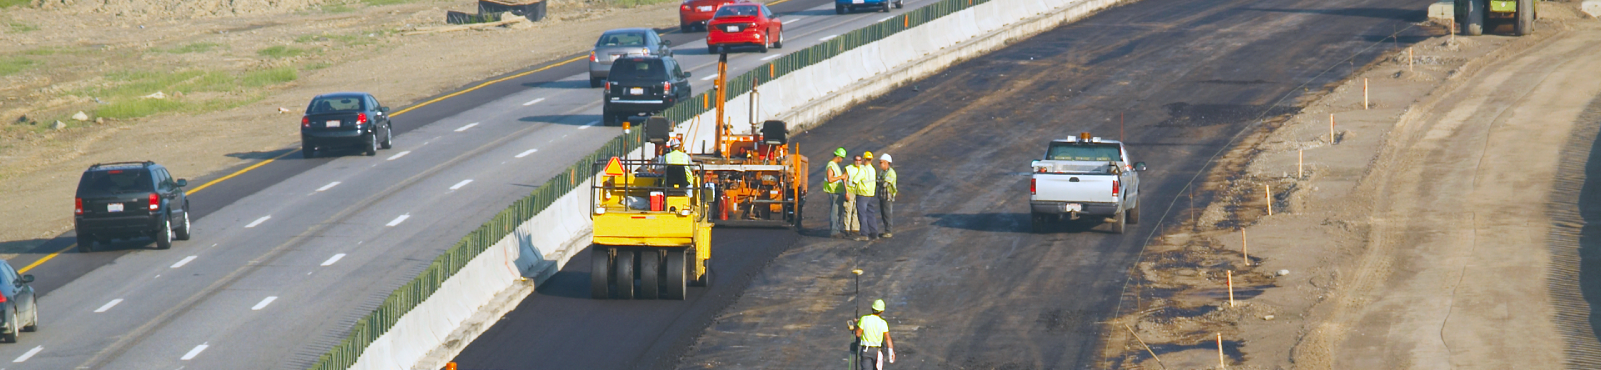 FHWA Releases Nearly $60 Billion for Infrastructure Improvements